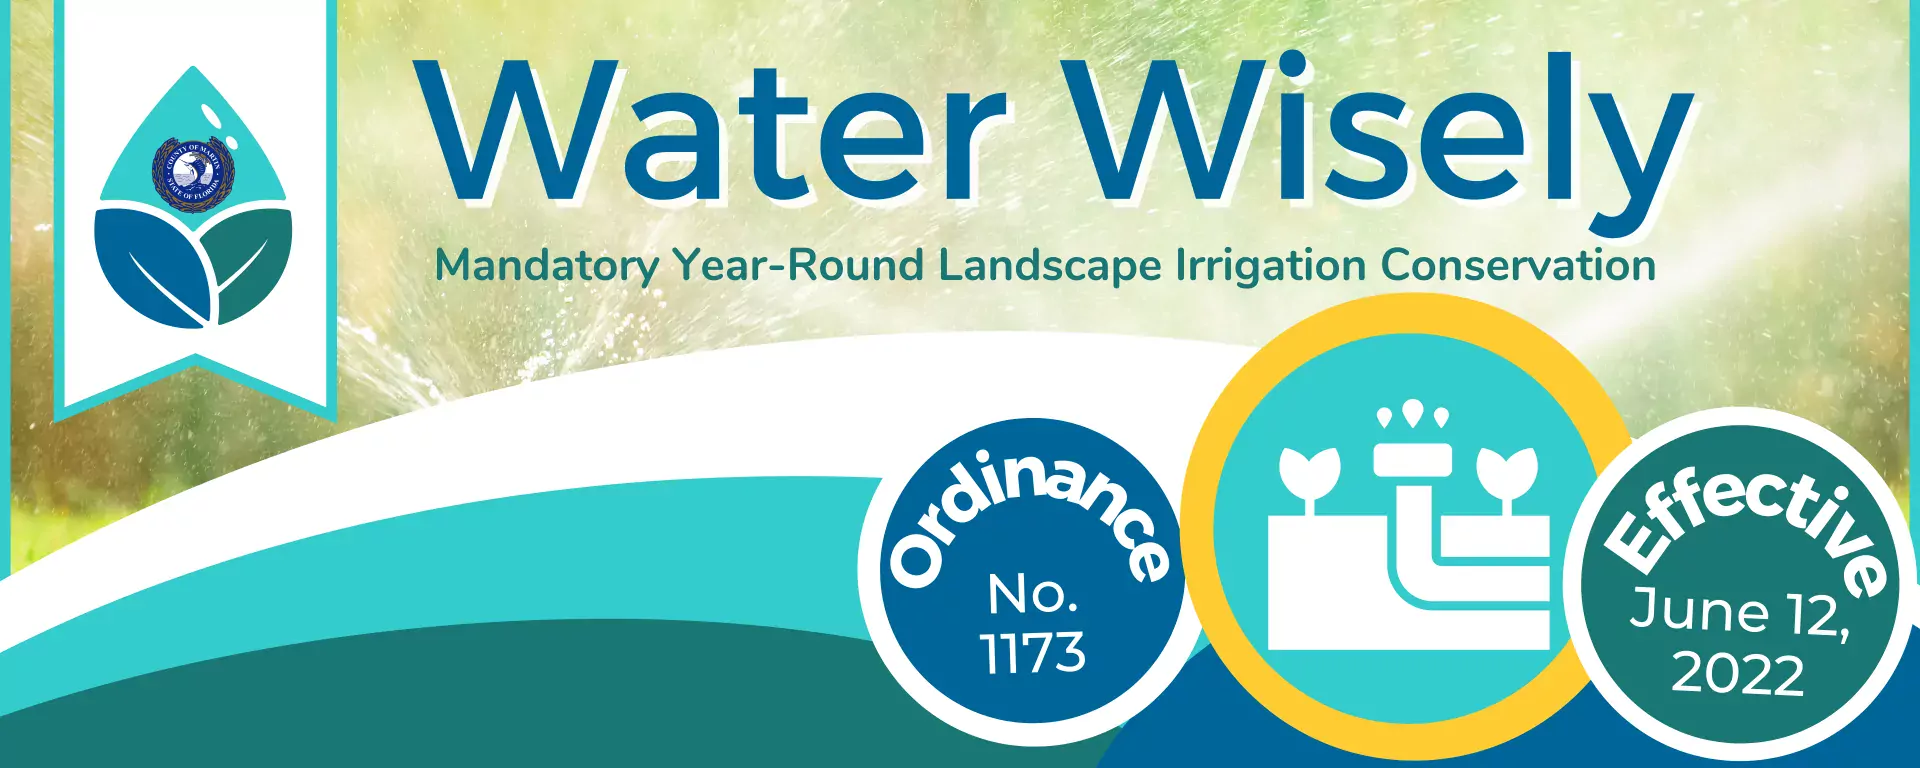 Water Wisely. Mandatory Year-Round Landscape Irrigation Conservation